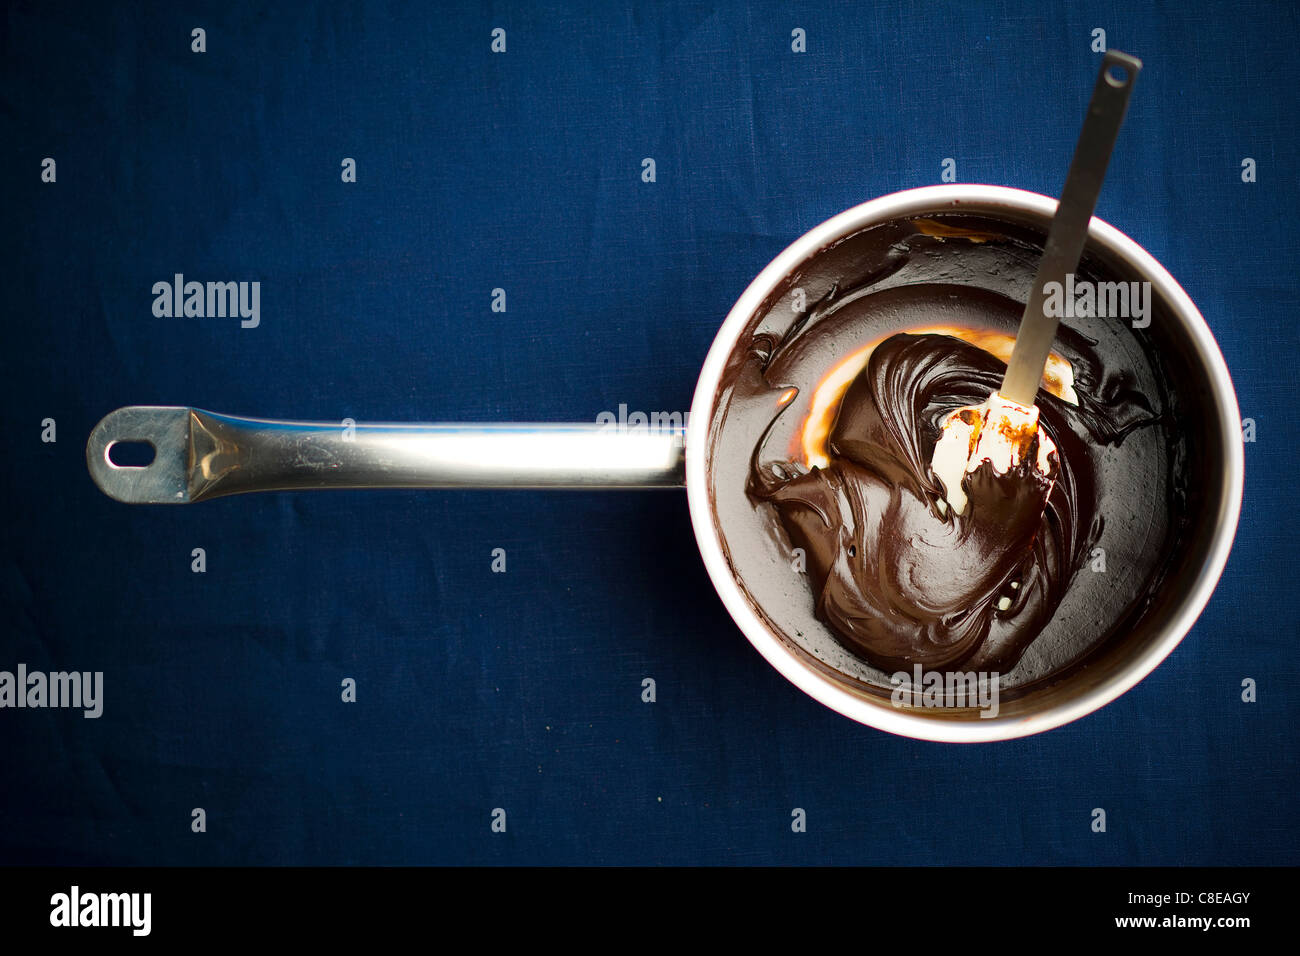 Saucepan of melted chocolate Stock Photo